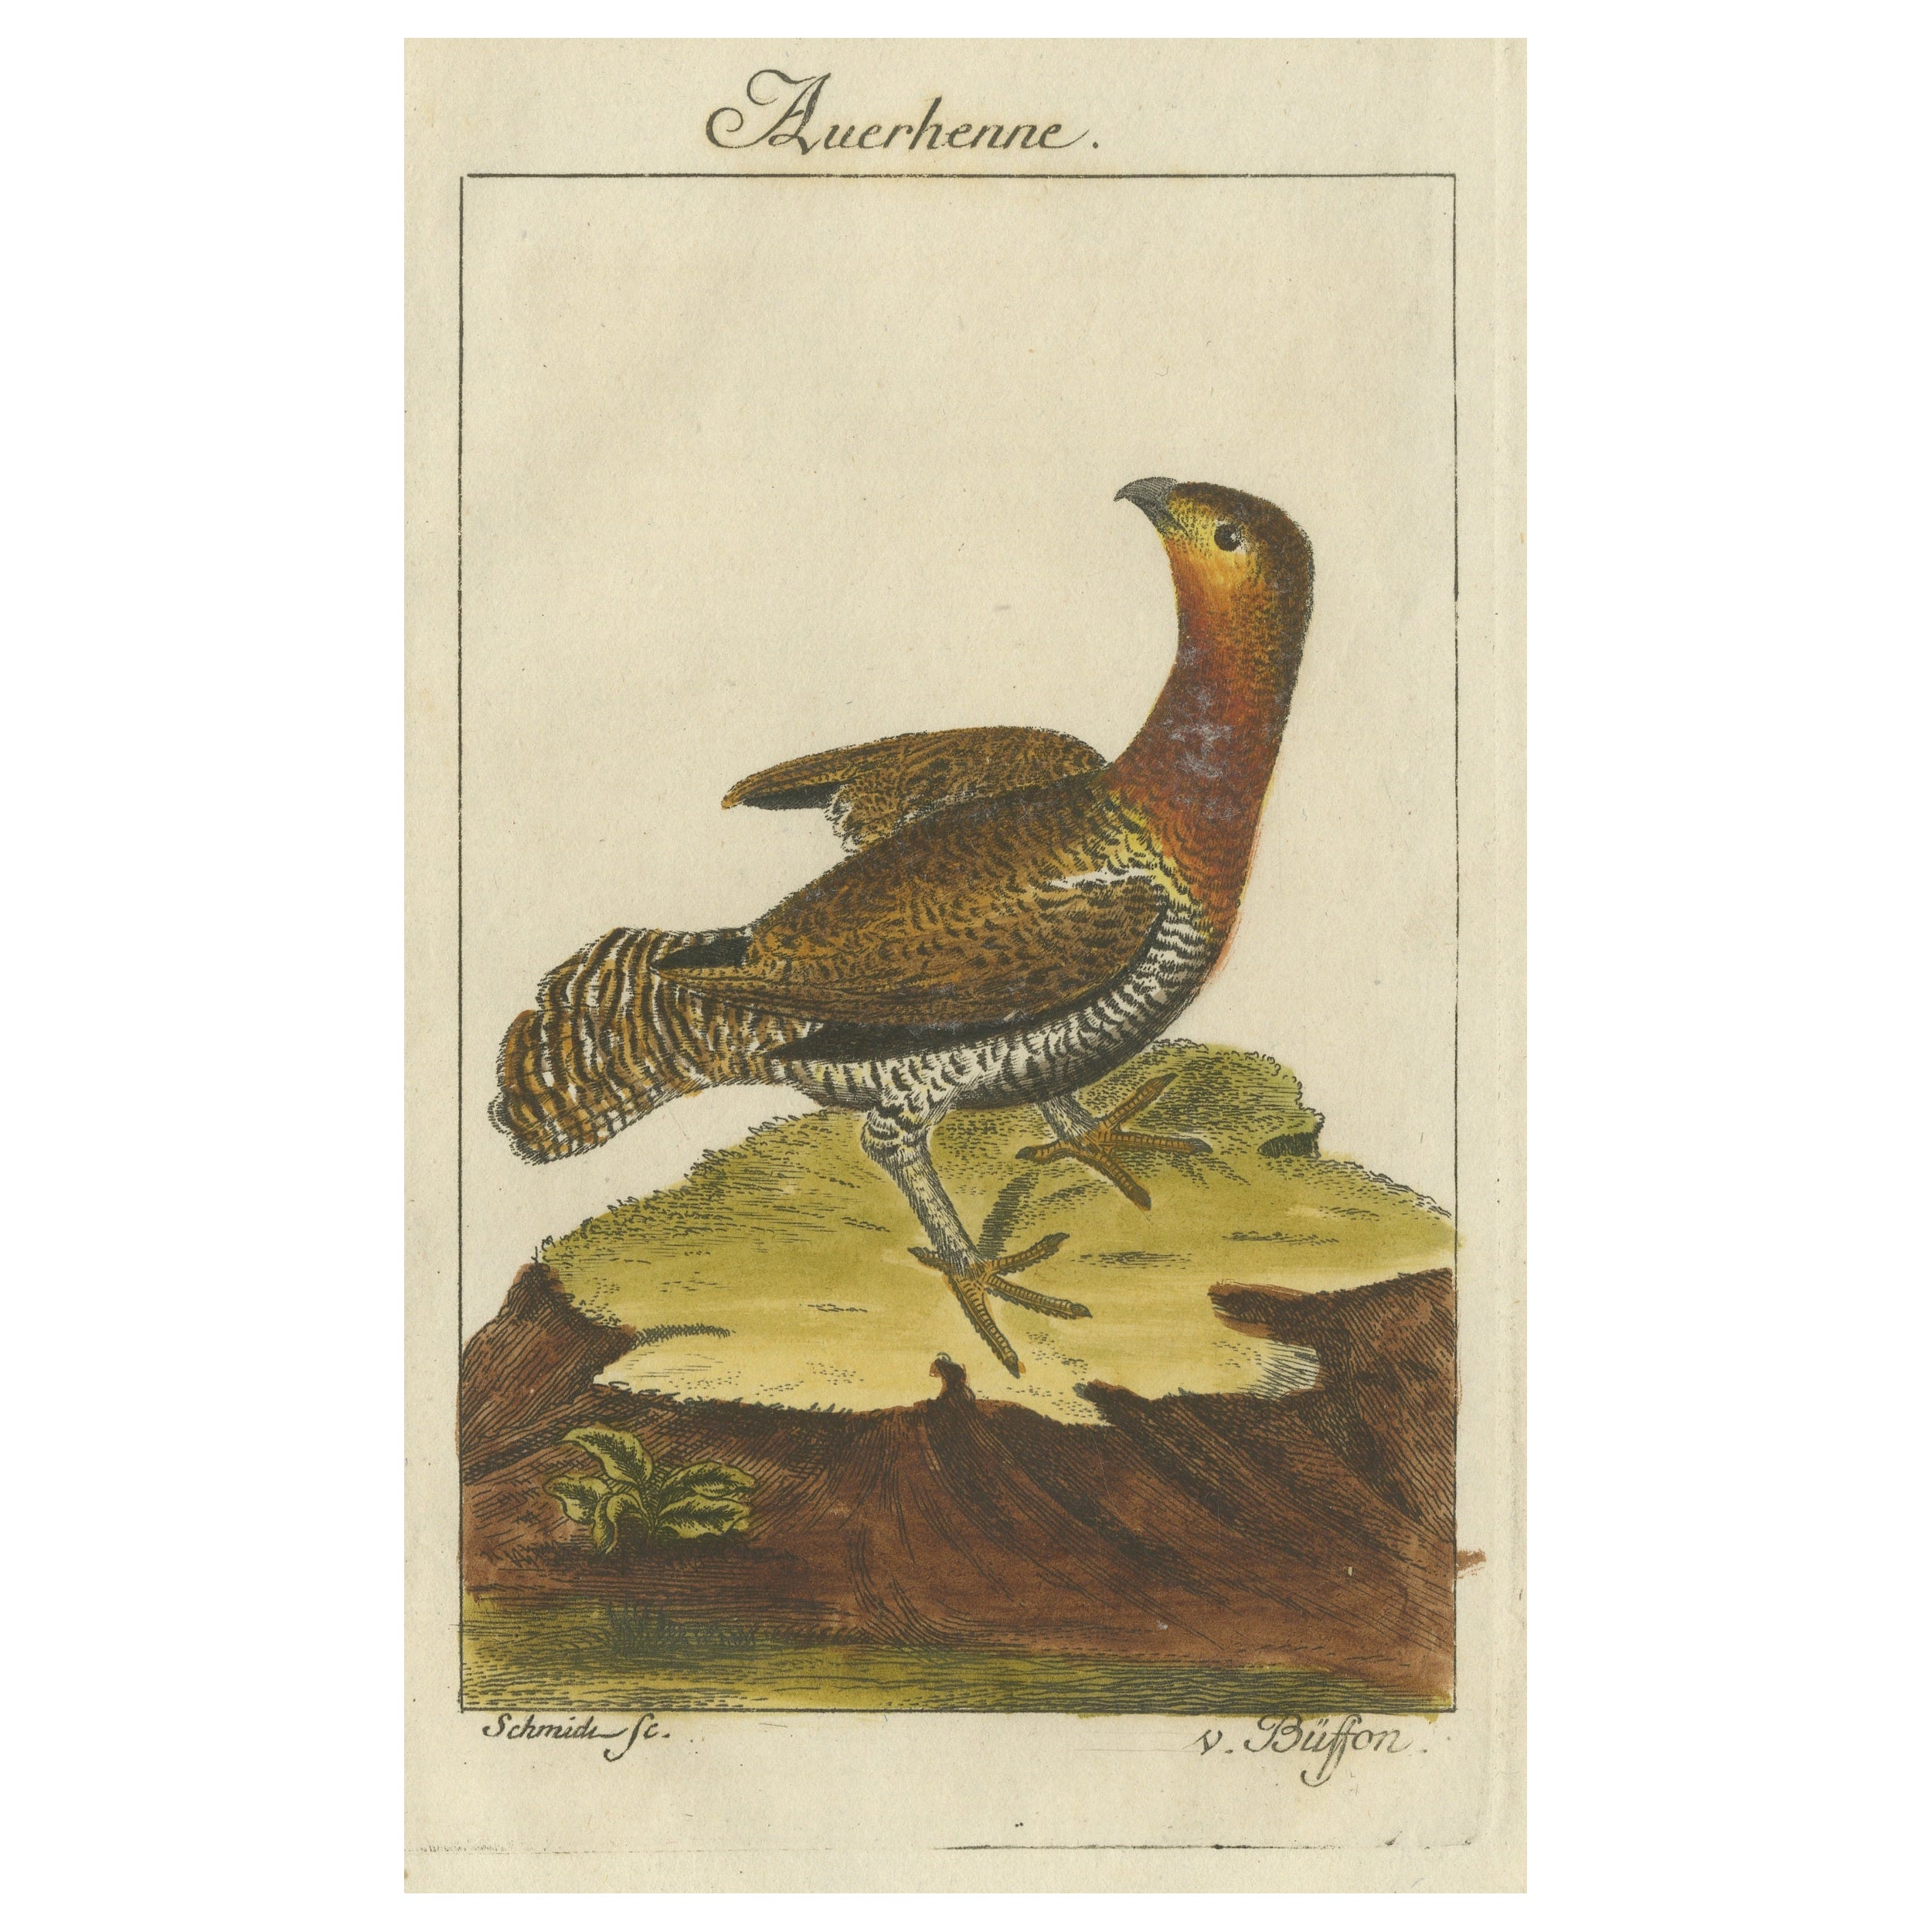 Antique Bird Print of a Western Capercaillie or Wood Grouse Hen For Sale